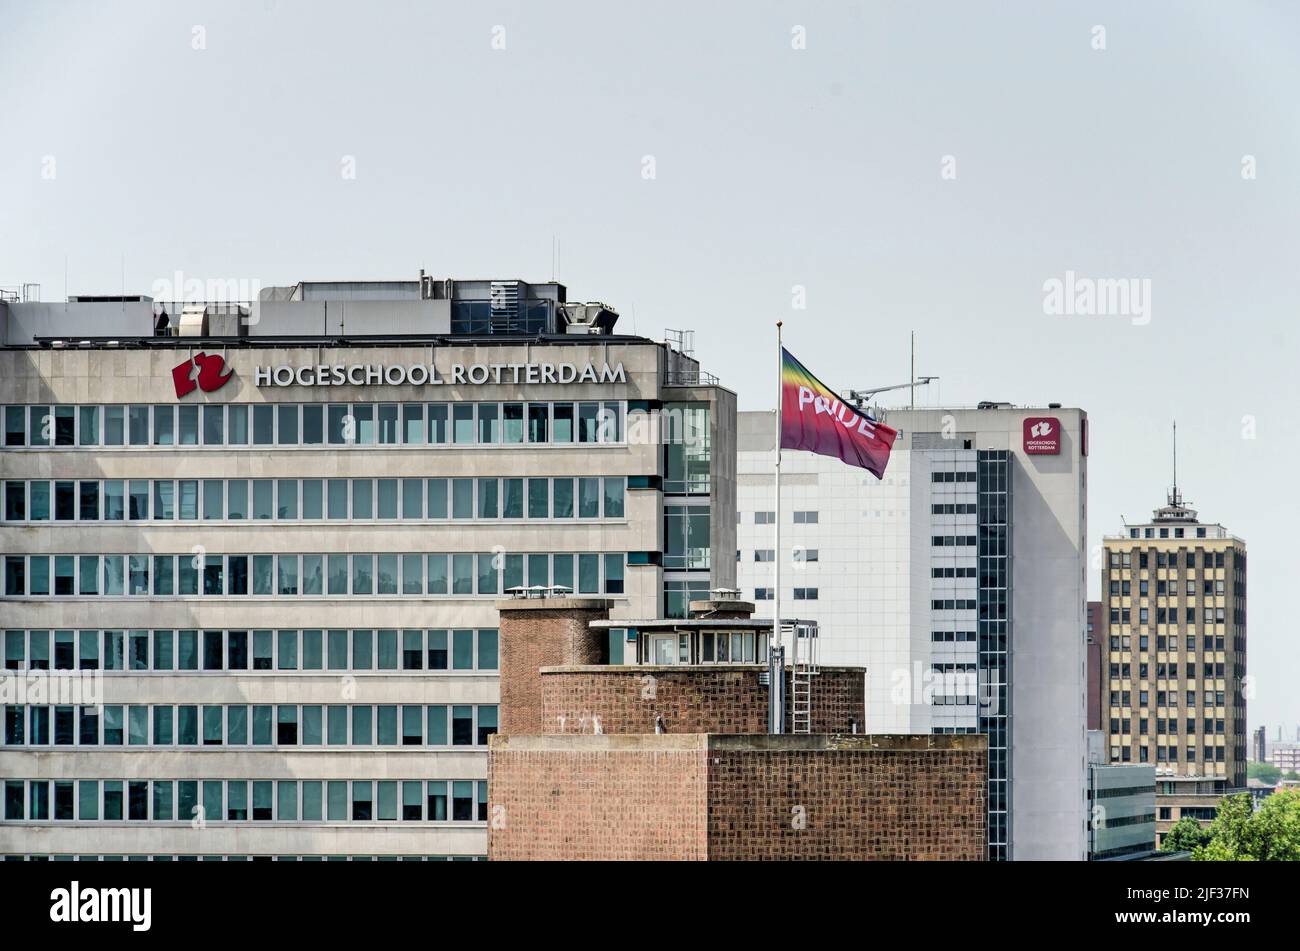 Rotterdam, The Netherlands, June 18, 2022: two buildings of the Hogeschool, with a pride flage on one of them Stock Photo